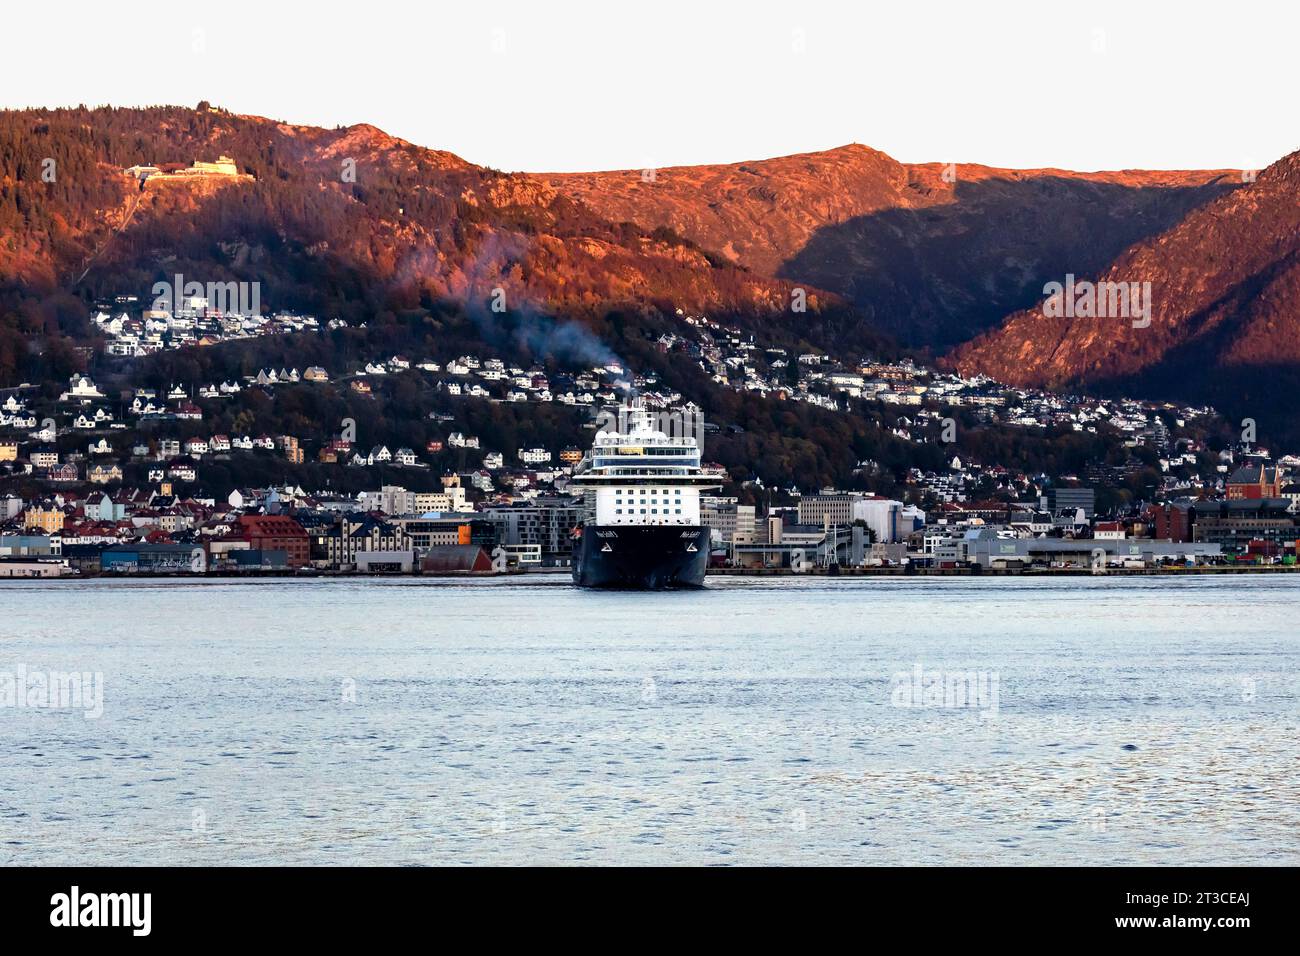 Cruise ship Mein Schiff 3 at Puddefjorden, departing late evening from the port of Bergen, Norway. Stock Photo